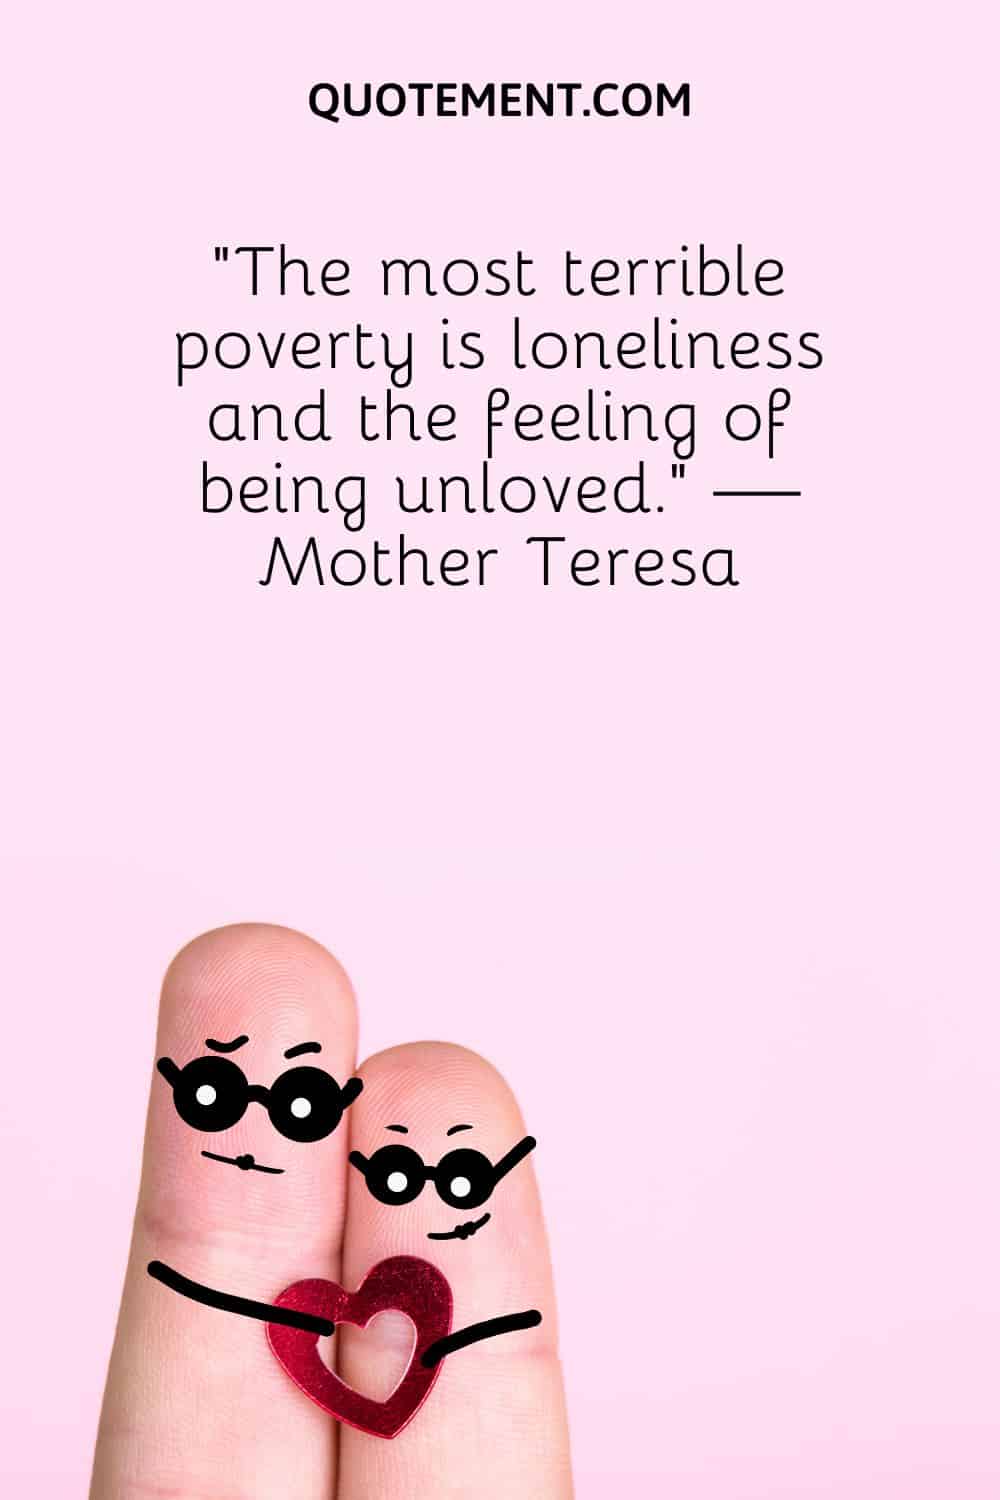 “The most terrible poverty is loneliness and the feeling of being unloved.” — Mother Teresa